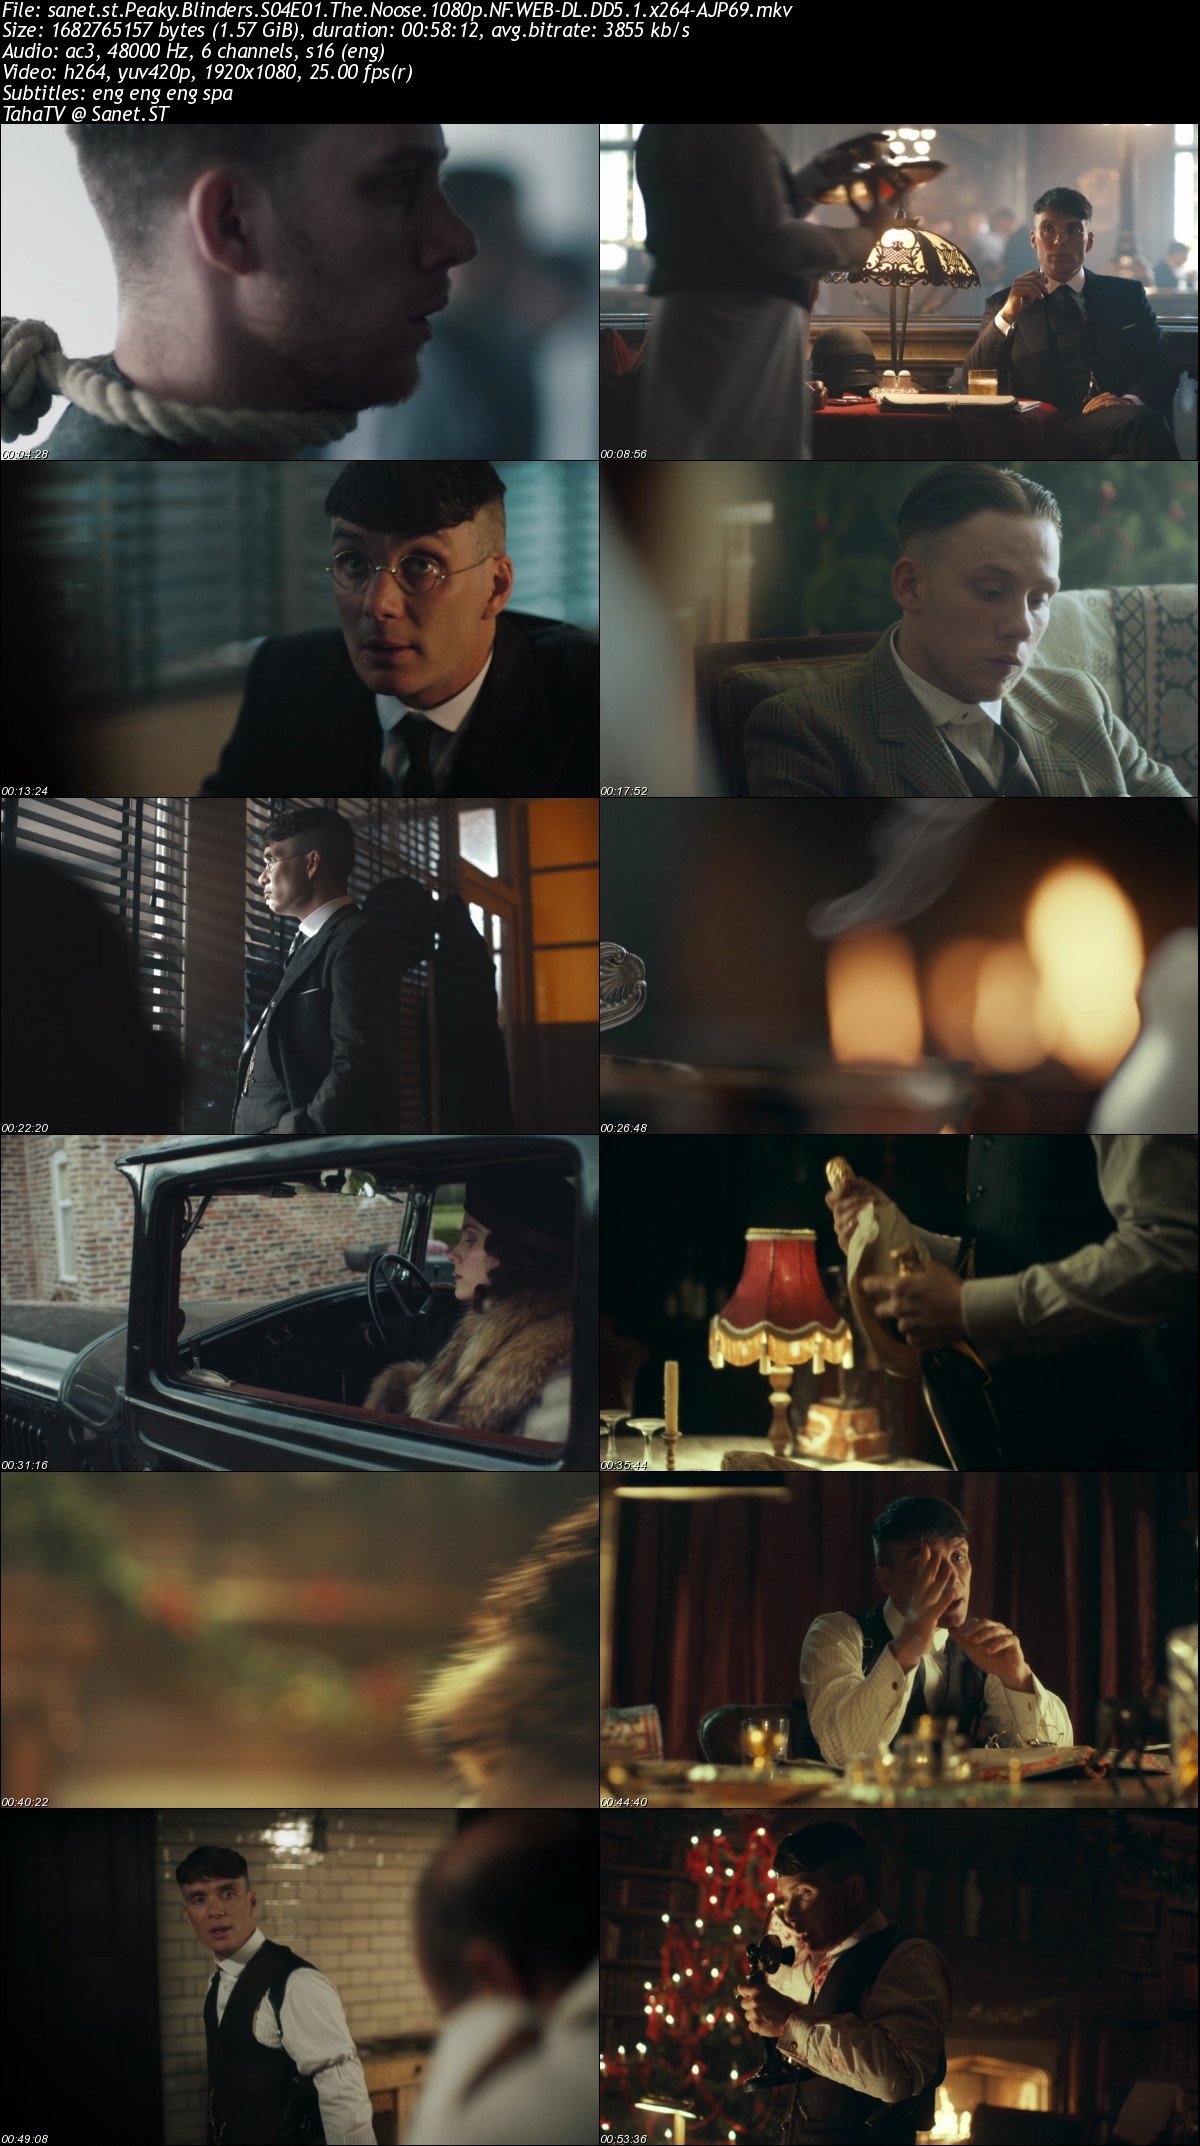 Download Peaky Blinders S04 1080p Nf Web Dl Dd5 1 X264 Ajp69 Softarchive 